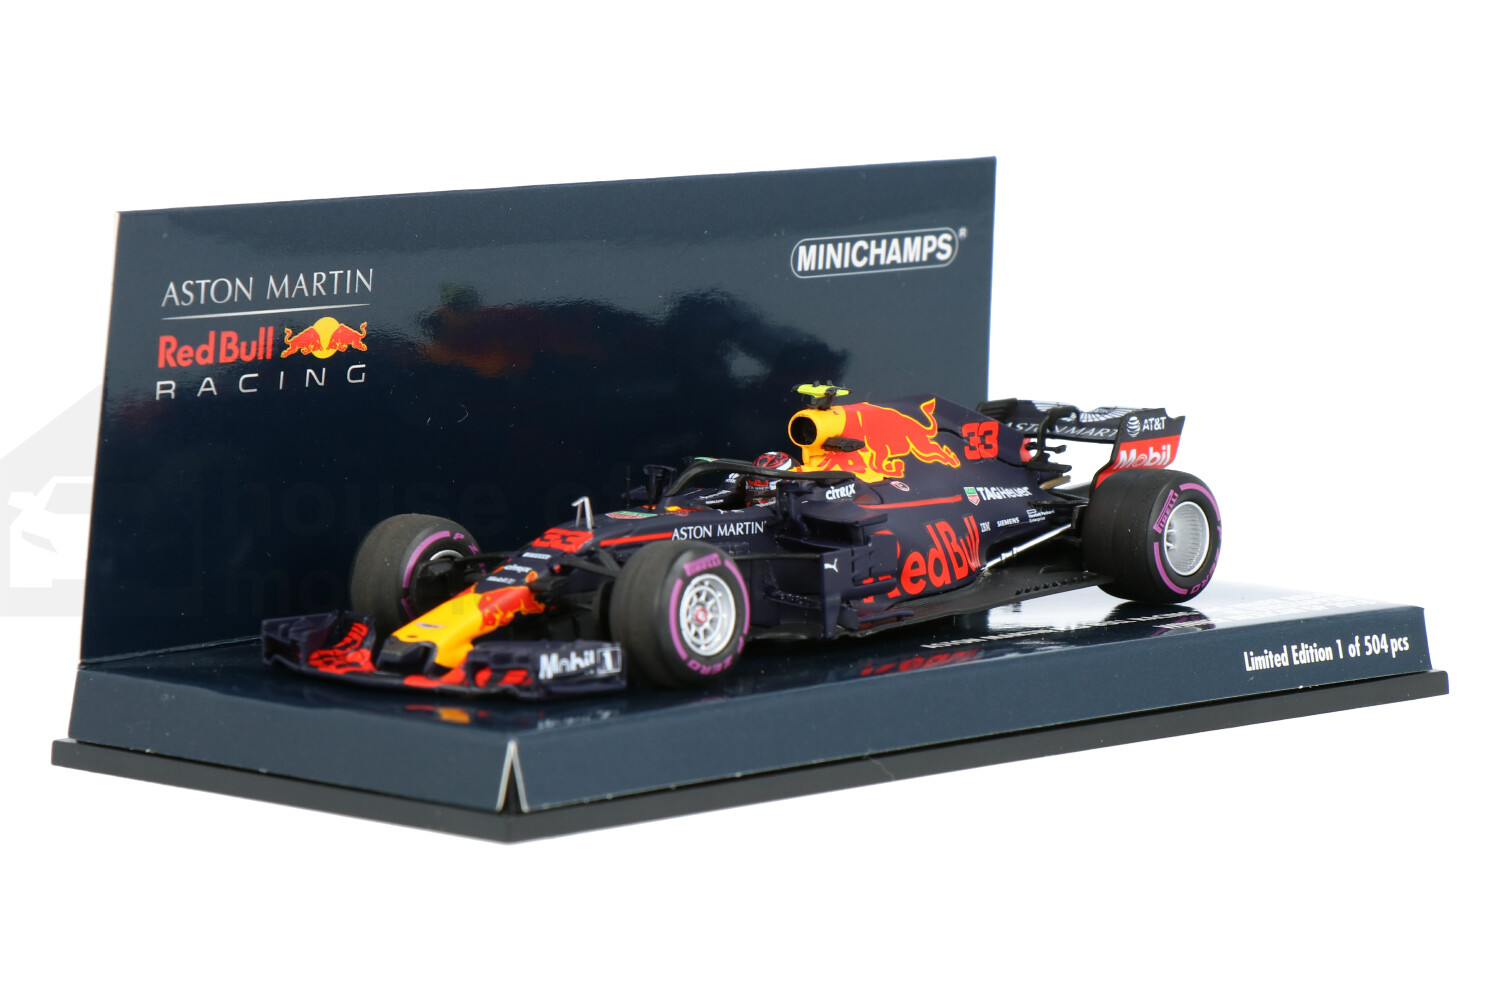 Aston-Martin-Red-Bull-Racing-Tag-Heuer-RB14-Max-Verstappen-410181933_43154012138166318-MinichampsAston-Martin-Red-Bull-Racing-Tag-Heuer-RB14-Max-Verstappen-410181933_Houseofmodelcars_.jpg